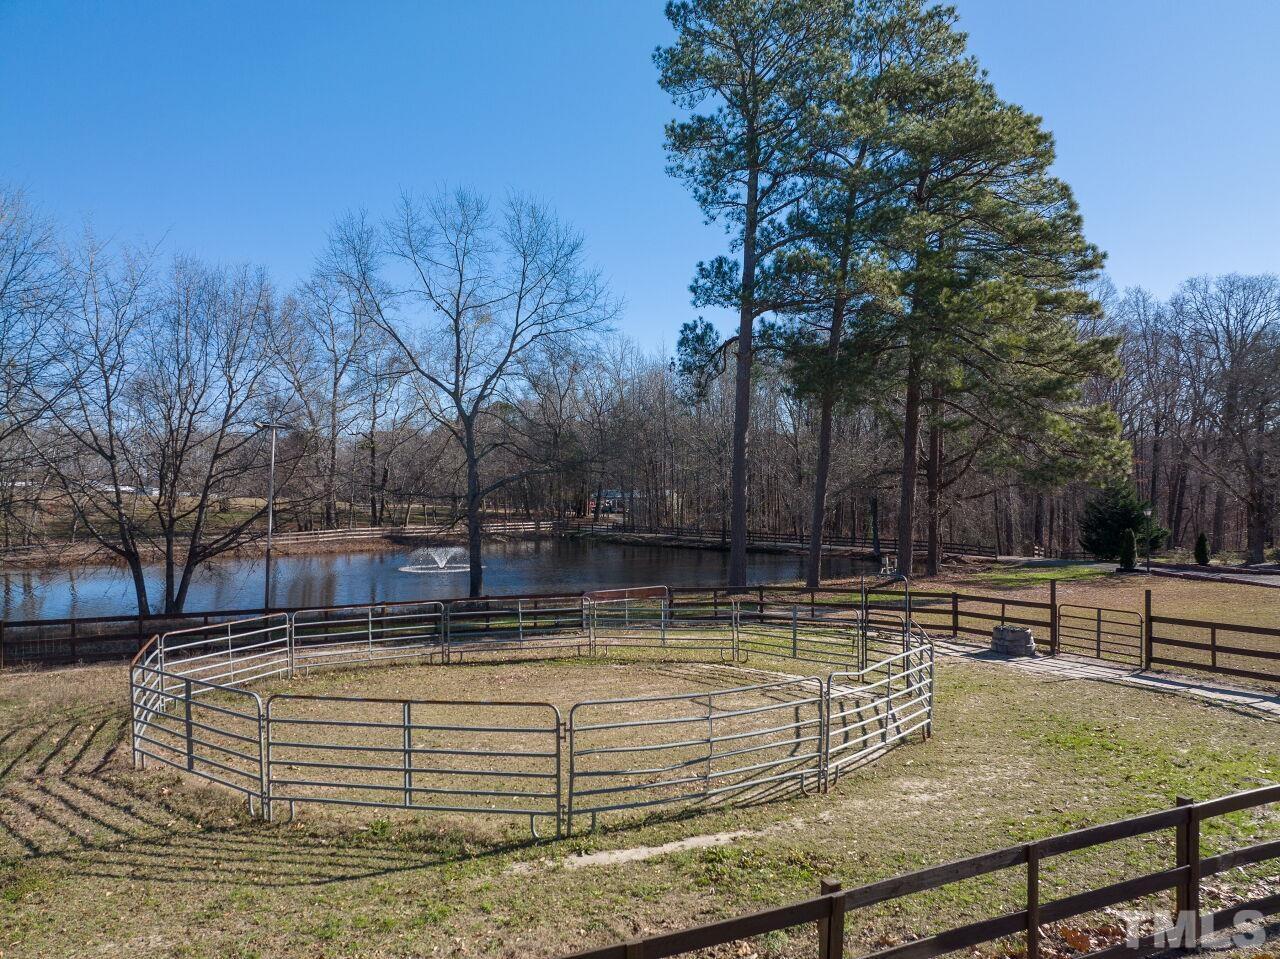 Riding ring - check; 2 horse fields - check; detached 5-car garage - check; pond - check; 3-stall horse barn - check.  Your checklist is complete!